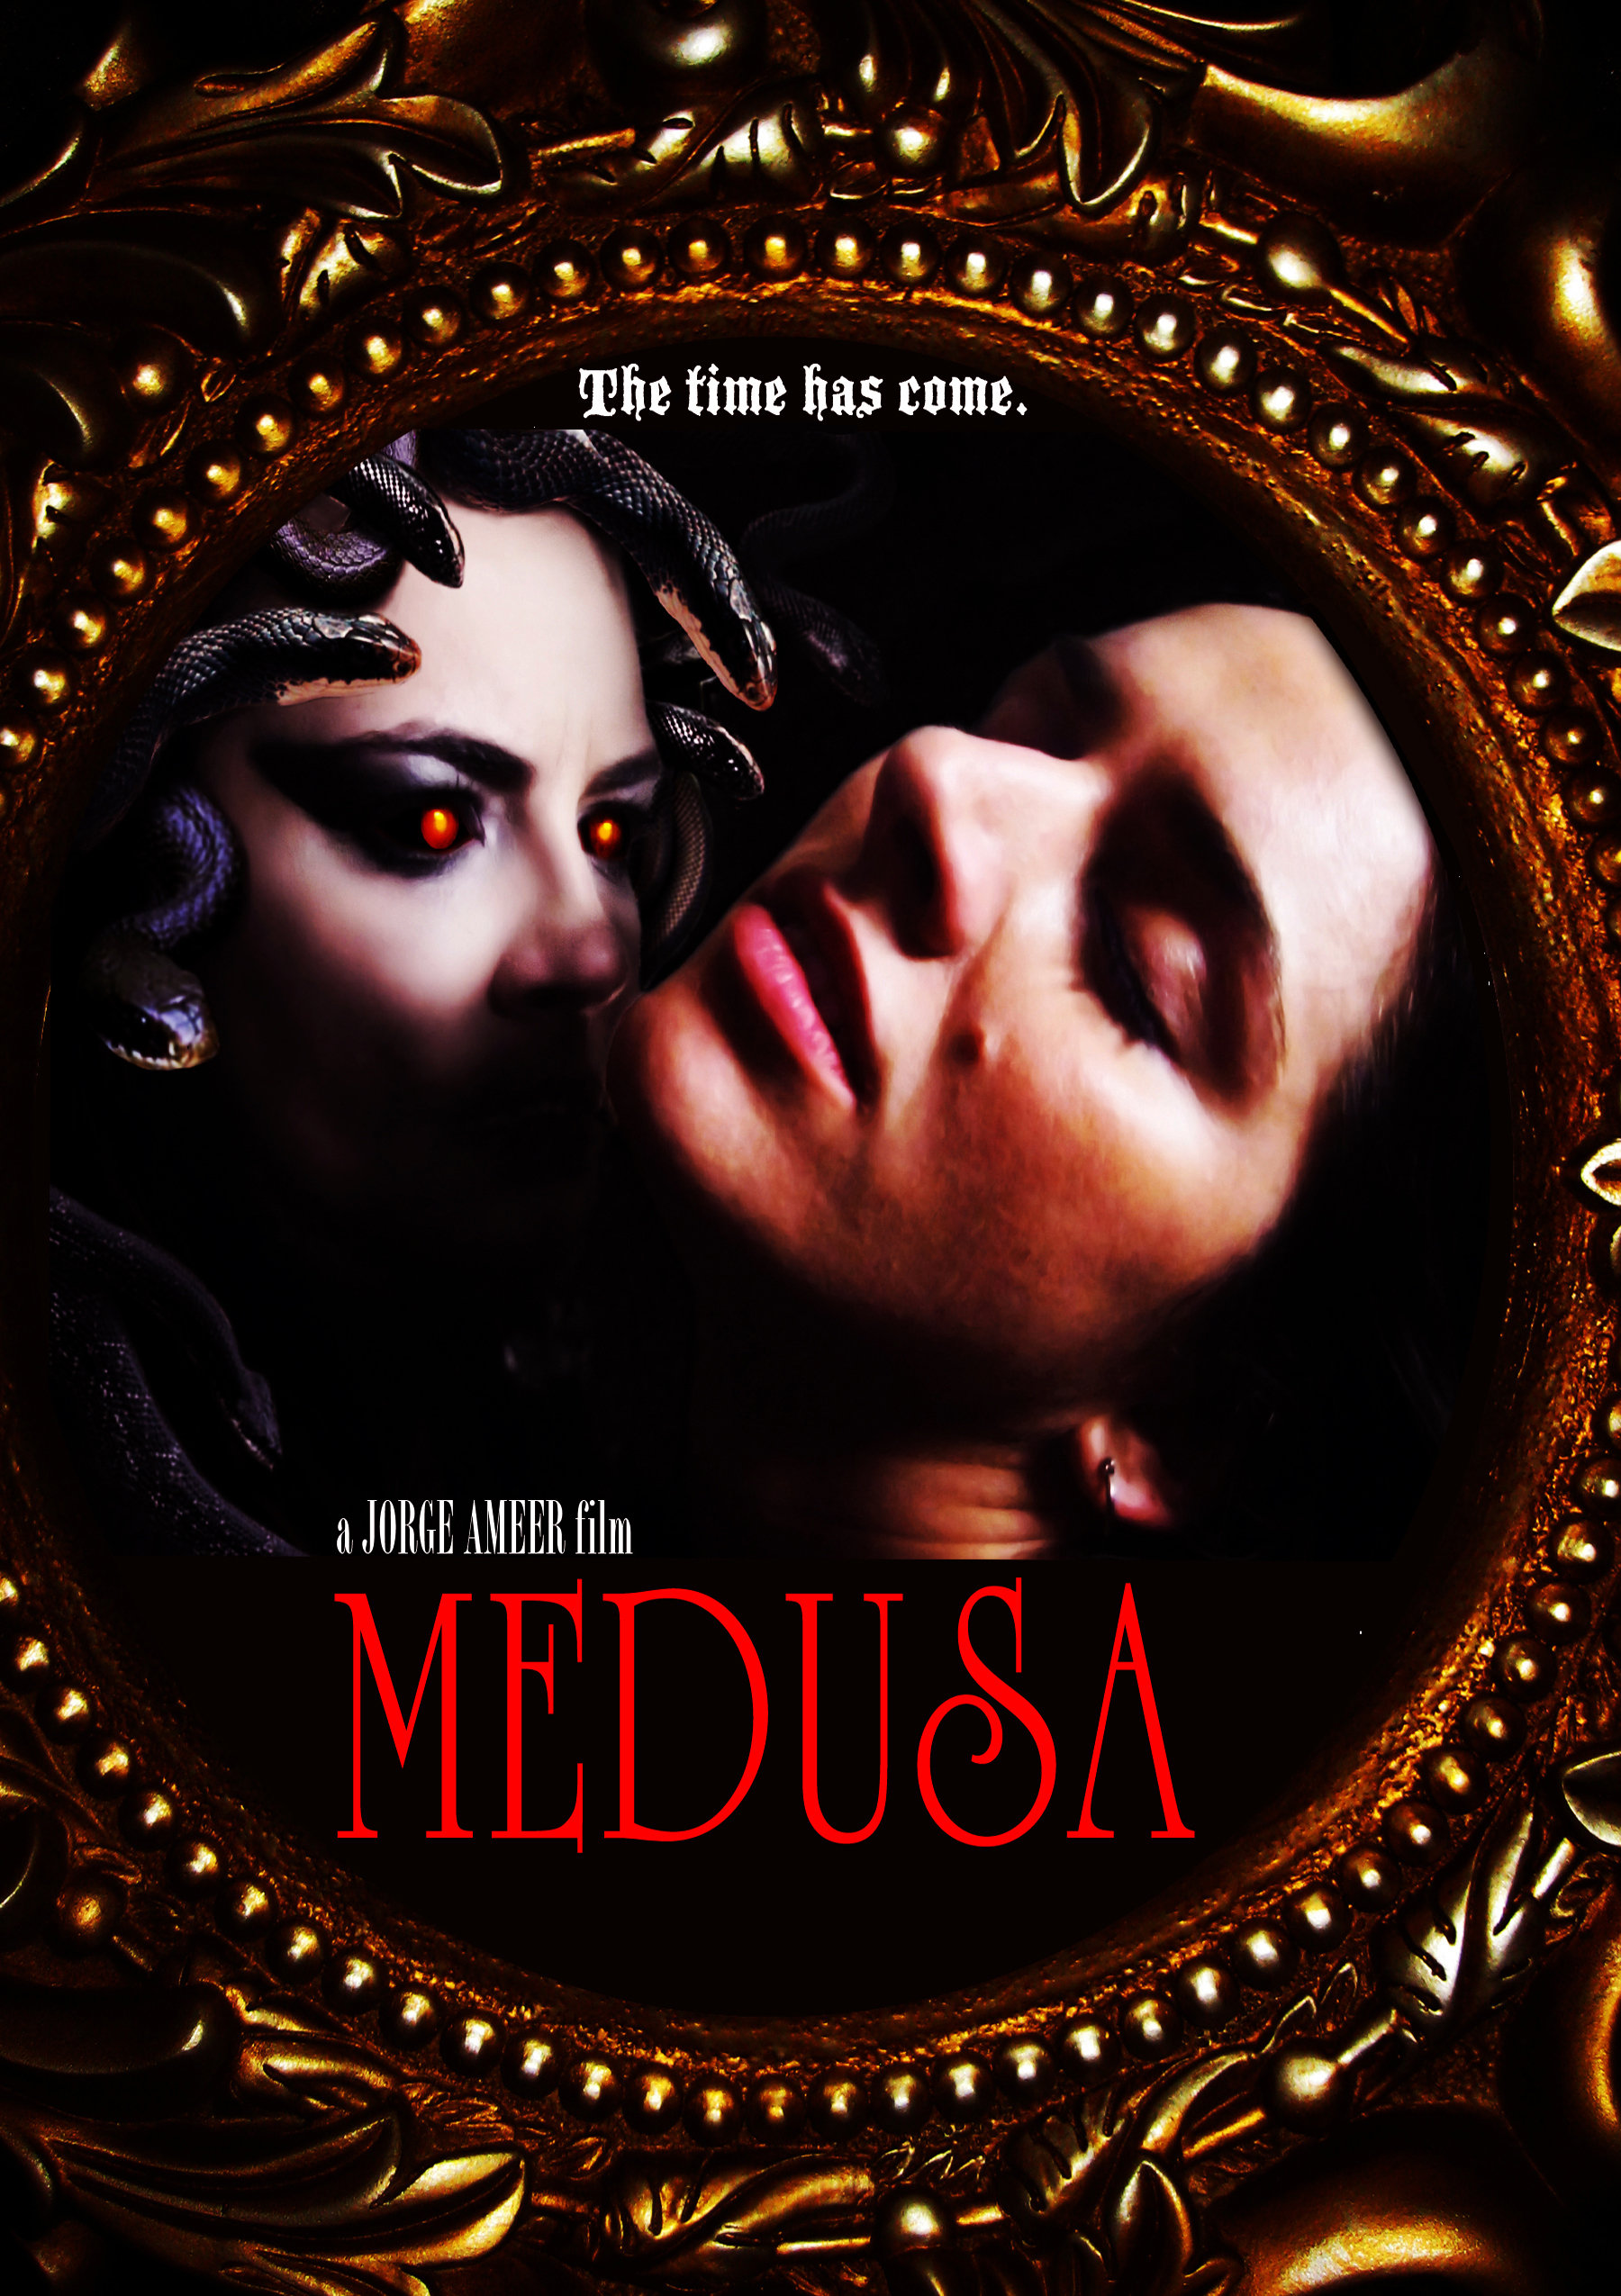 Official movie poster of the World Premiere of MEDUSA - 2015 CANNES FILM FESTIVAL/March Du Film - Sunday, May 17, 2015 - PALAIS D 3:30pm more info on medusa or for press pictures go to www.hollywoodindependents.com Join the Facebook page https://www.facebook.com/MEDUSAhorrorFILM TWITTER: @MEDUSA_themovie INSTAGRAM: @MEDUSAthemovie